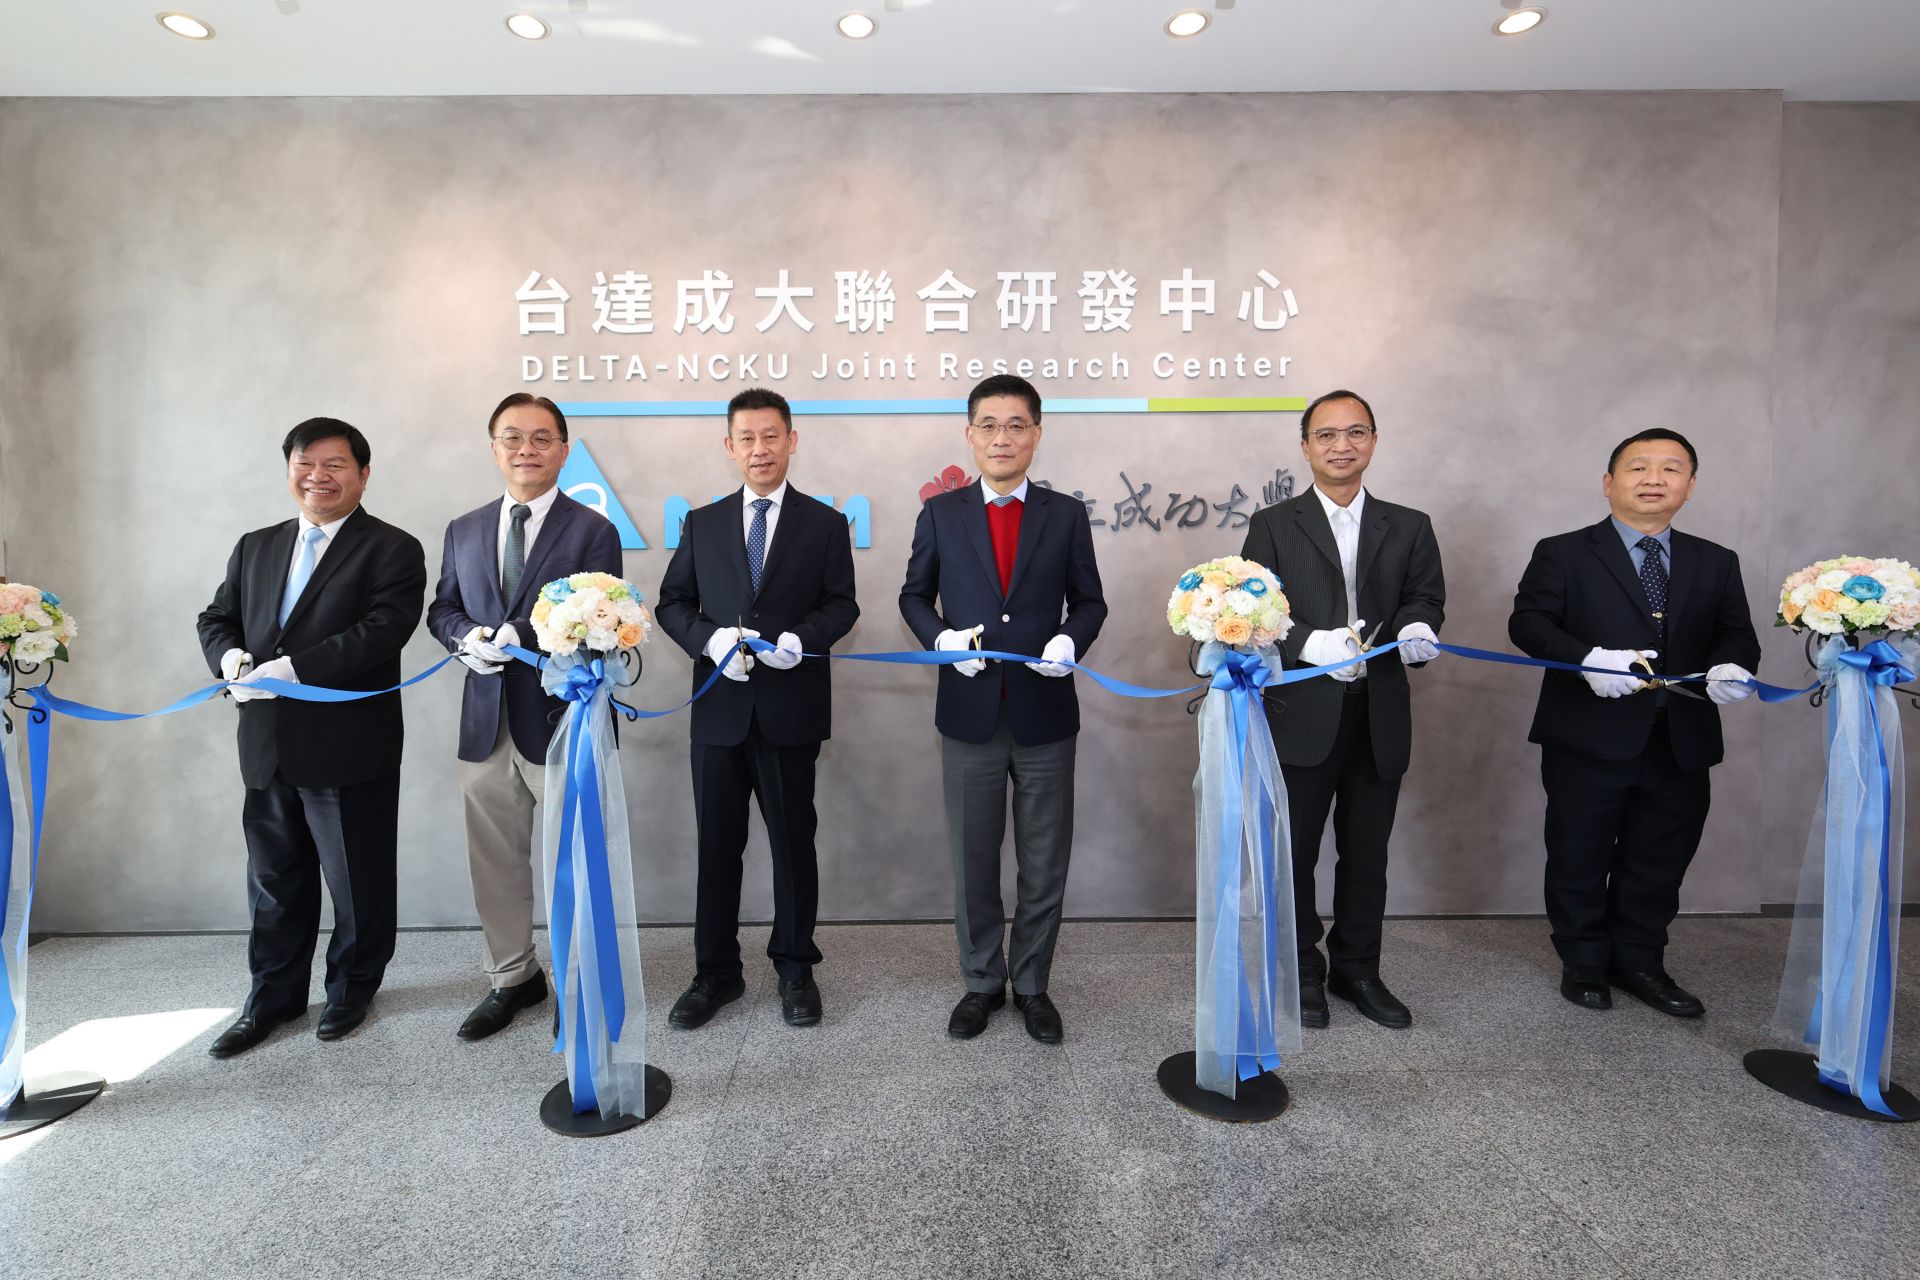 NCKU and Delta Electronics Unveil Joint Research Center, Focusing on Green Energy and Smart Automation Applications.